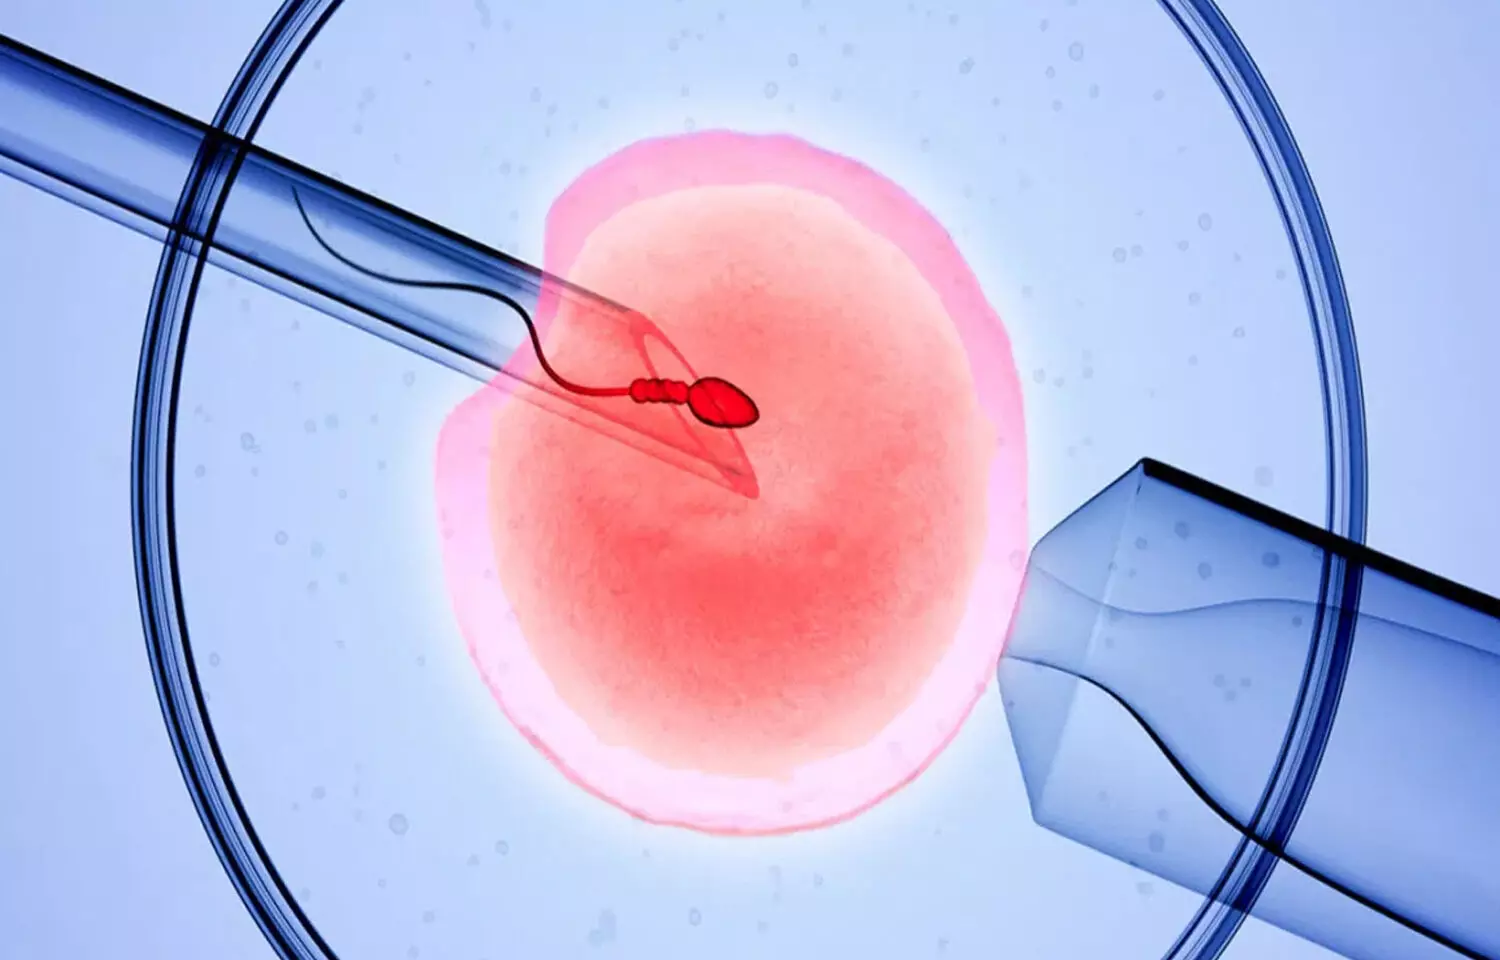 Embryo freezing for IVF linked to blood pressure problems in pregnancy: Study